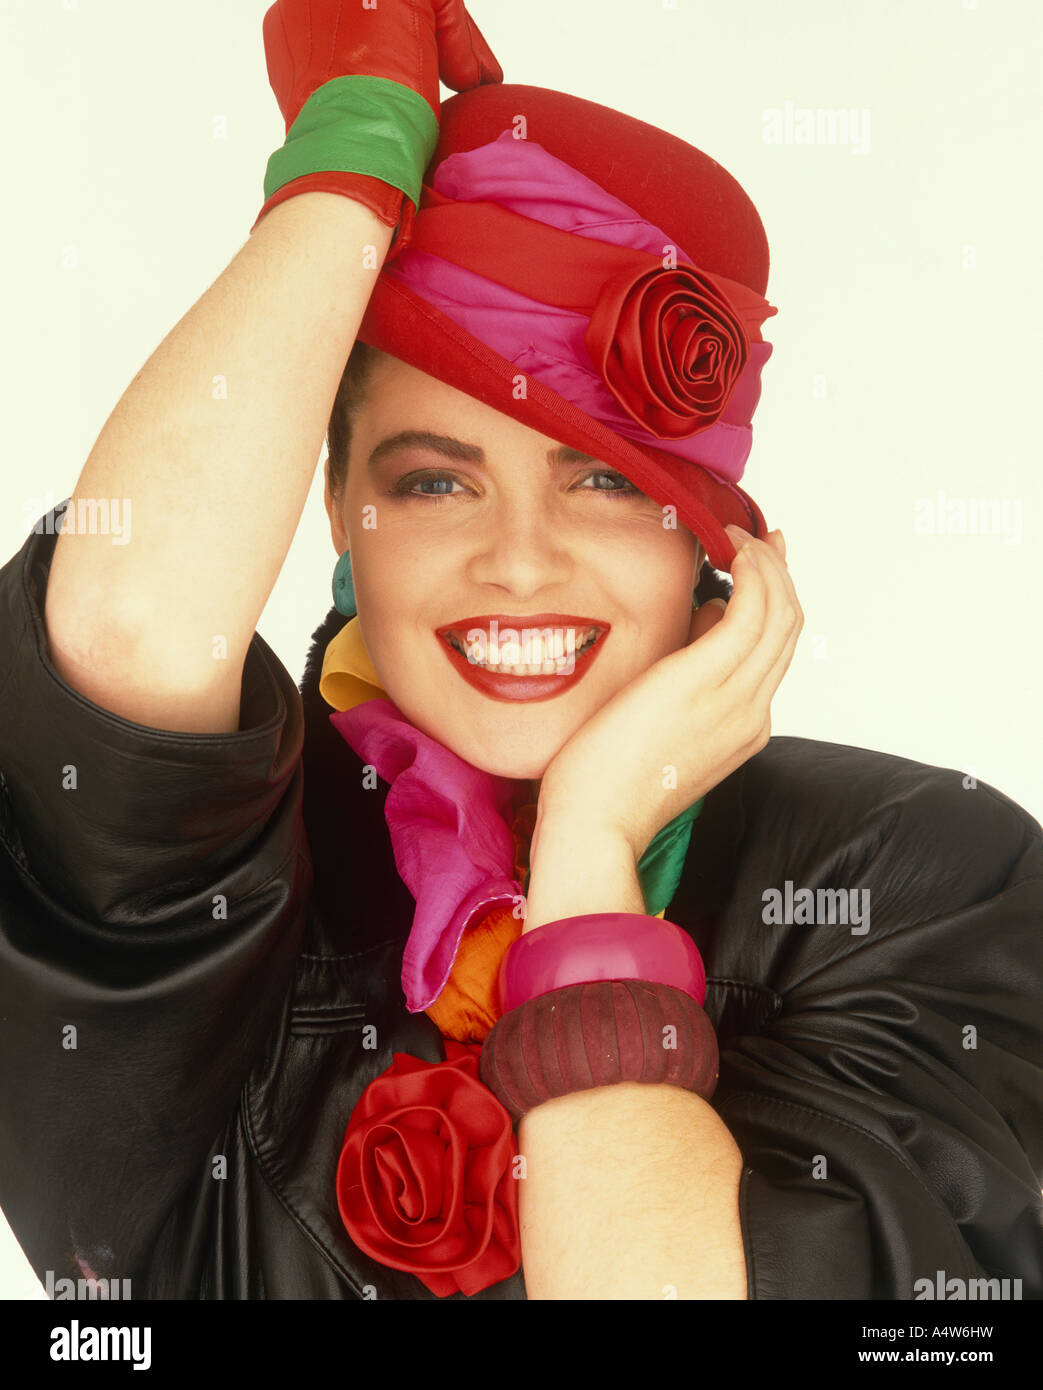 GIRL IN RED HAT GLOVES RED ROSE DETAIL Stock Photo